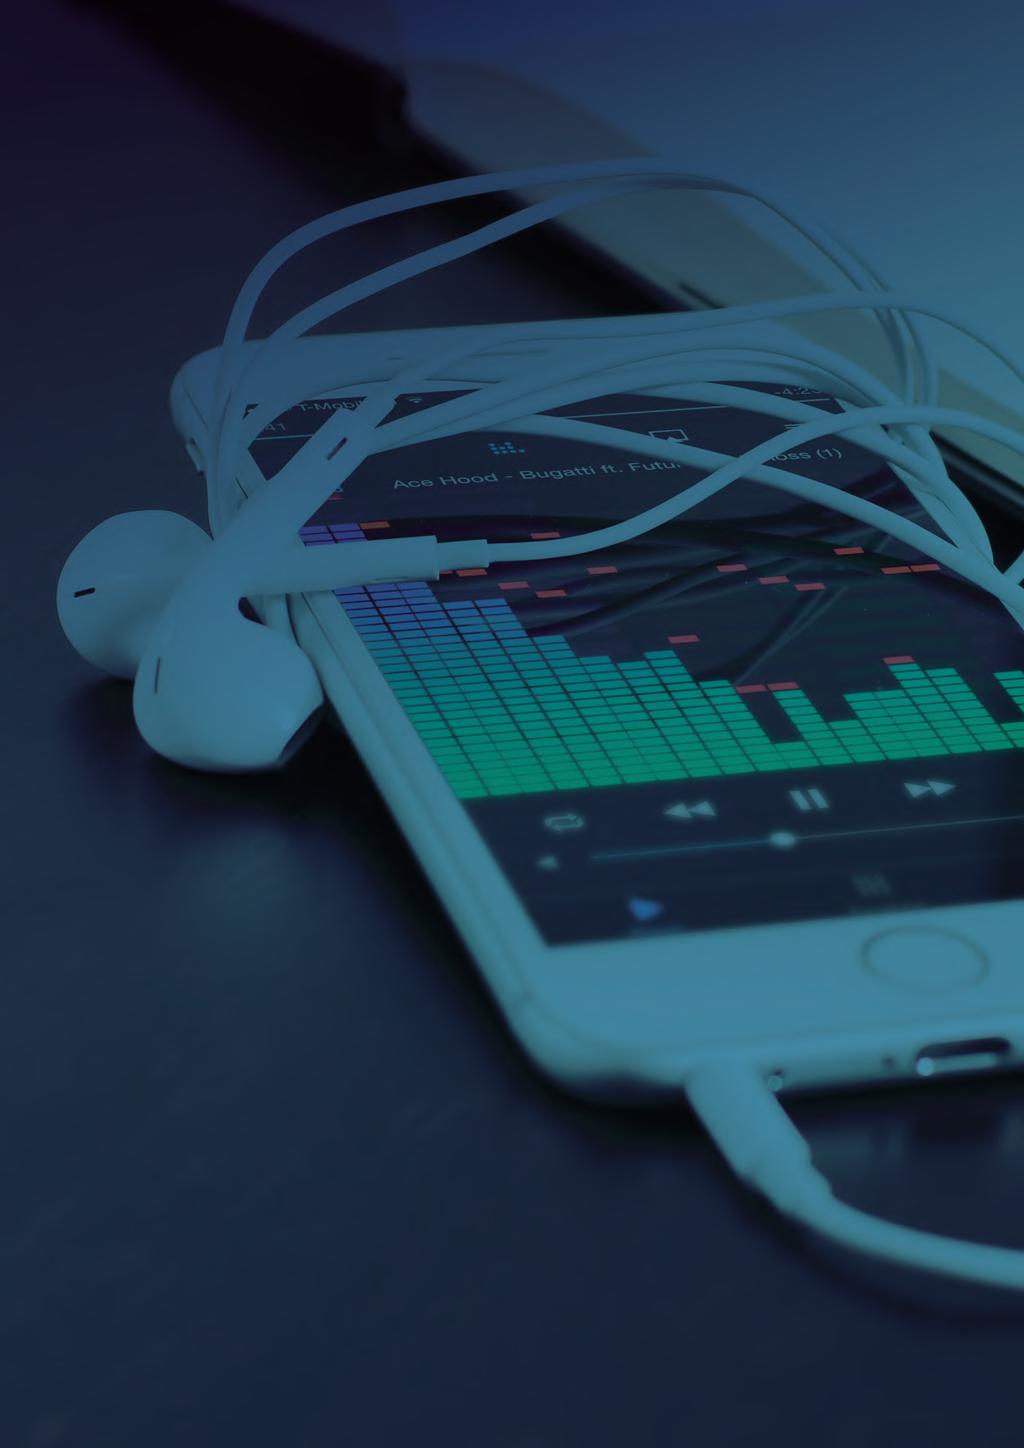 4 MUSIC DRIVES TECHNOLOGY ENGAGEMENT From smartphones to smart speakers, across the world connected devices are a growing part of the listening experience.